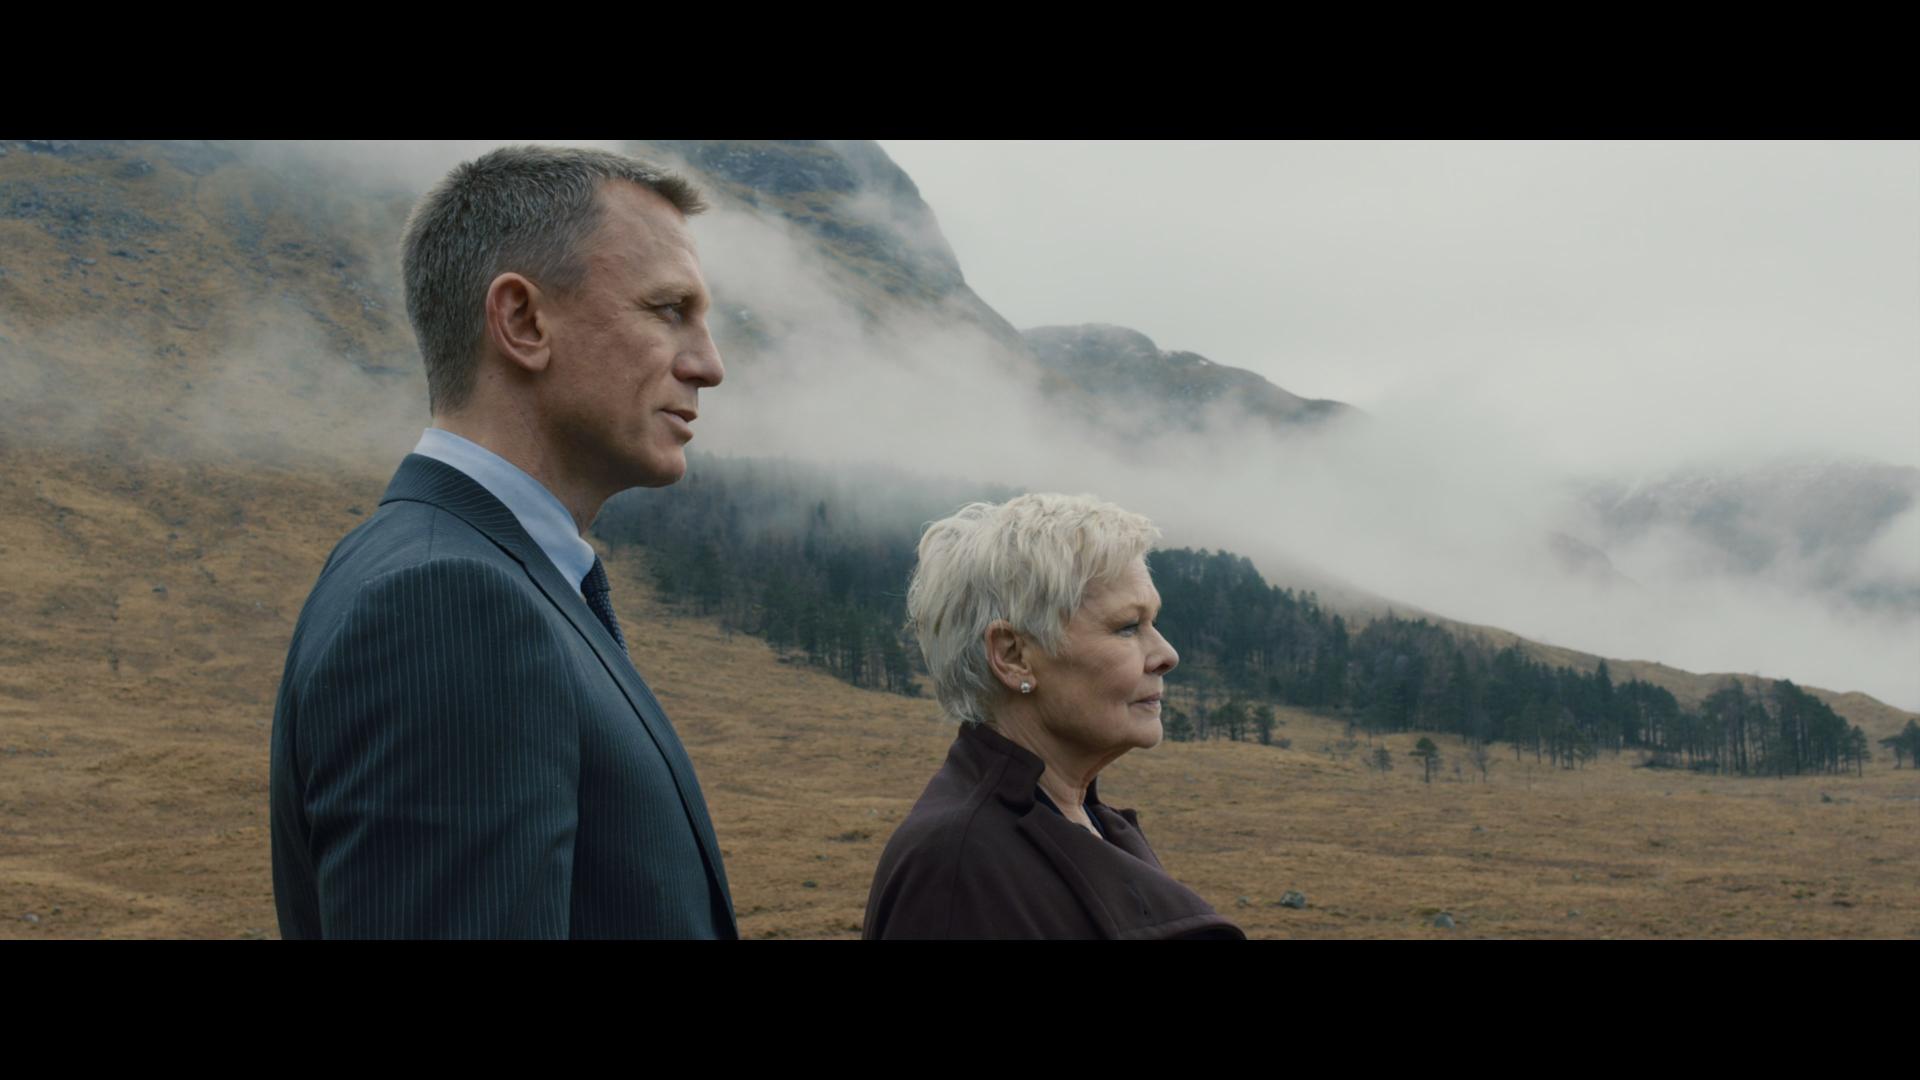 james bond and M in "skyfall"